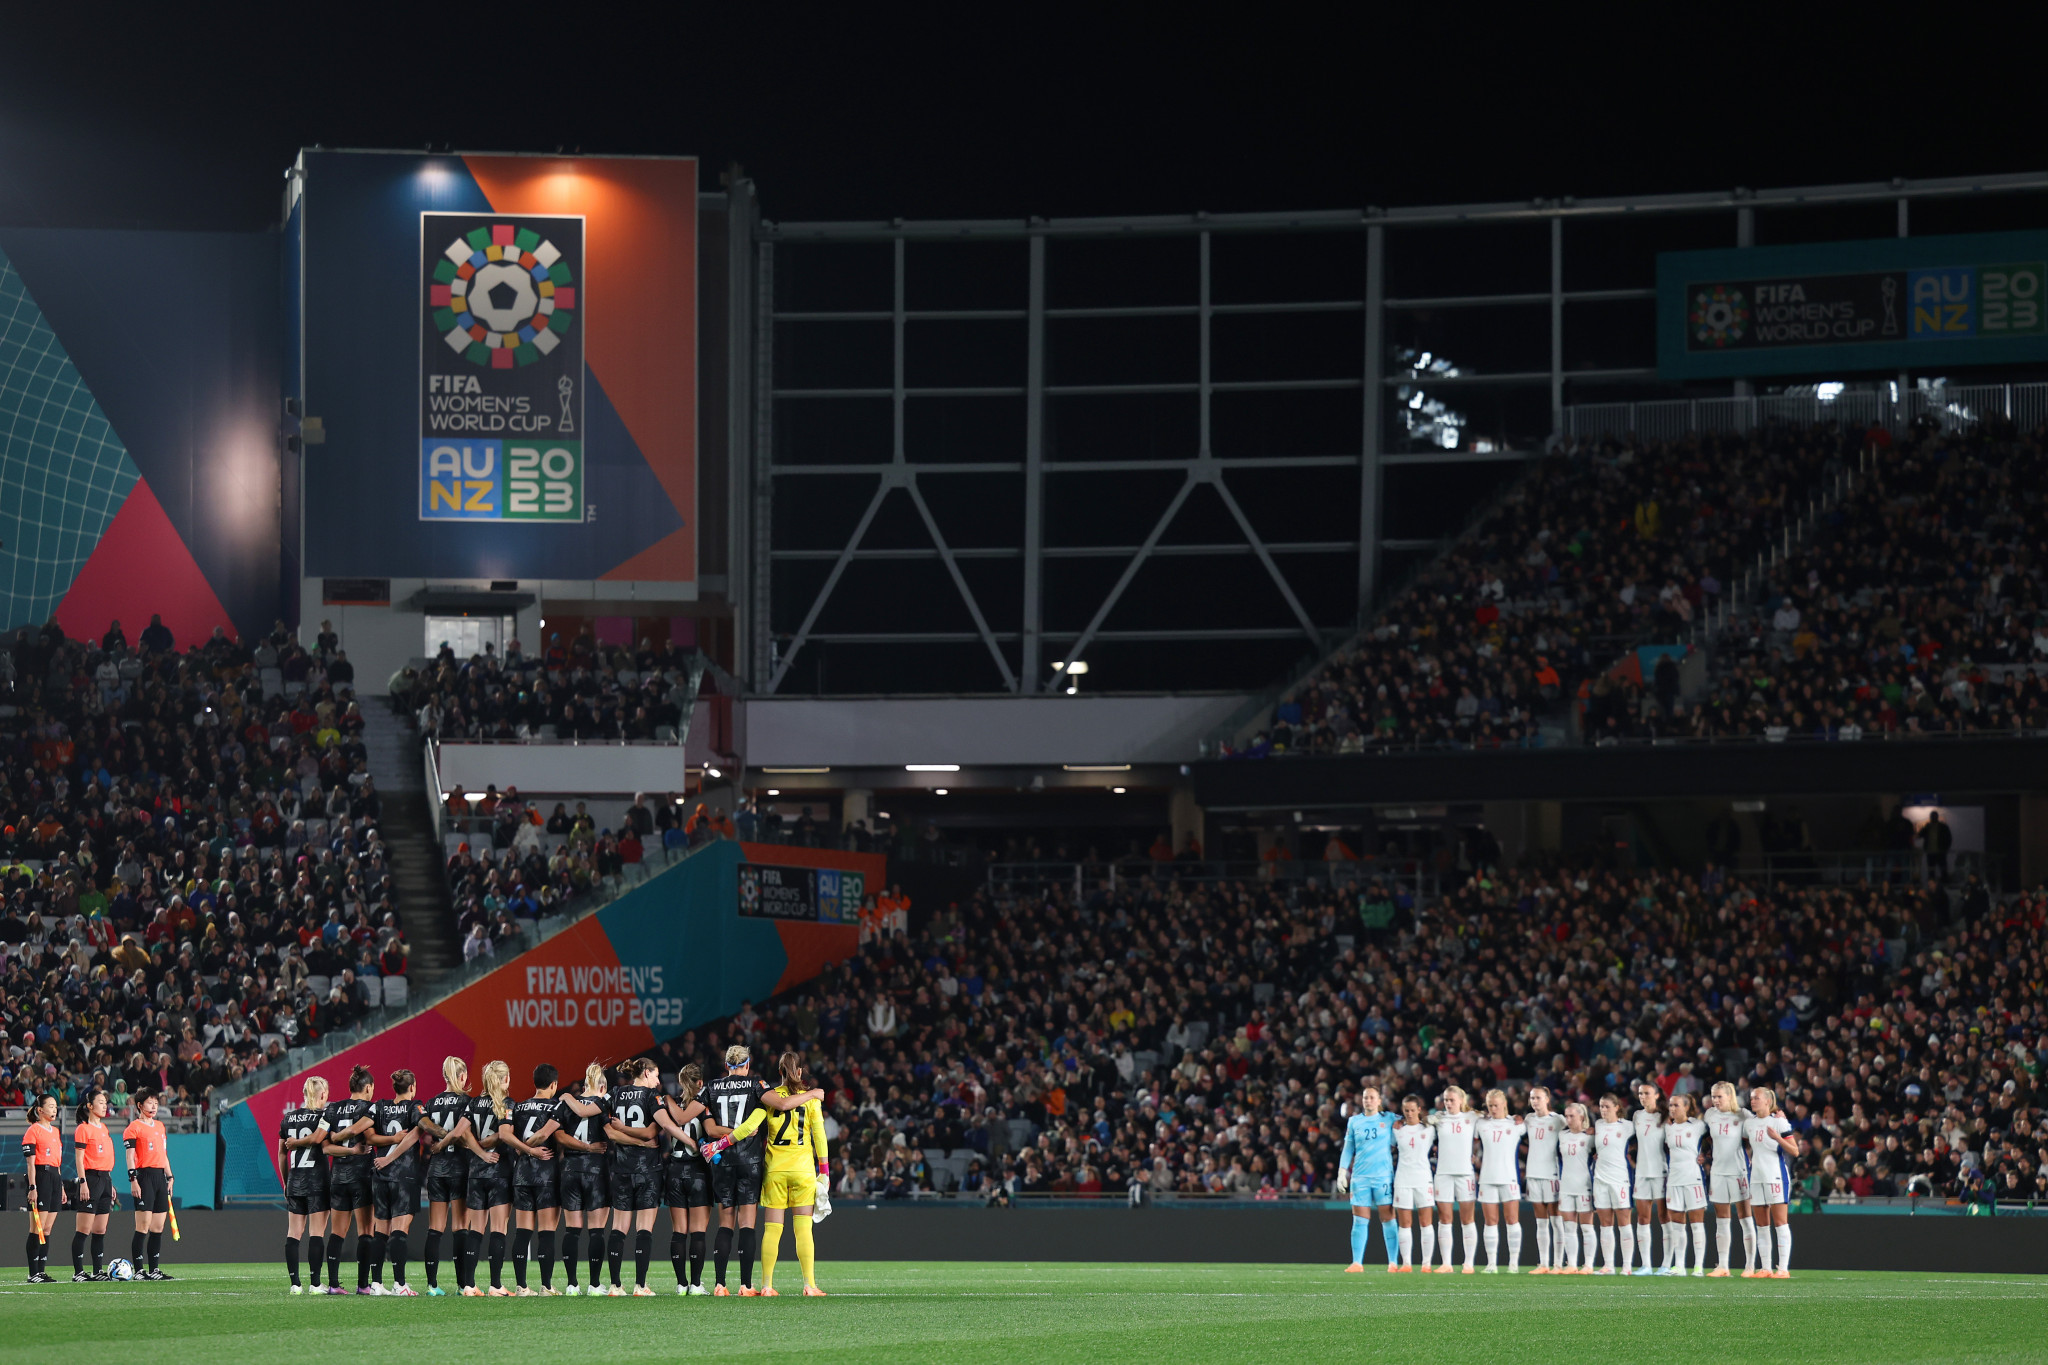 A moment's silence was held prior to kick-off between New Zealand and Norway to honour the two people shot dead in Auckland earlier in the day ©Getty Images